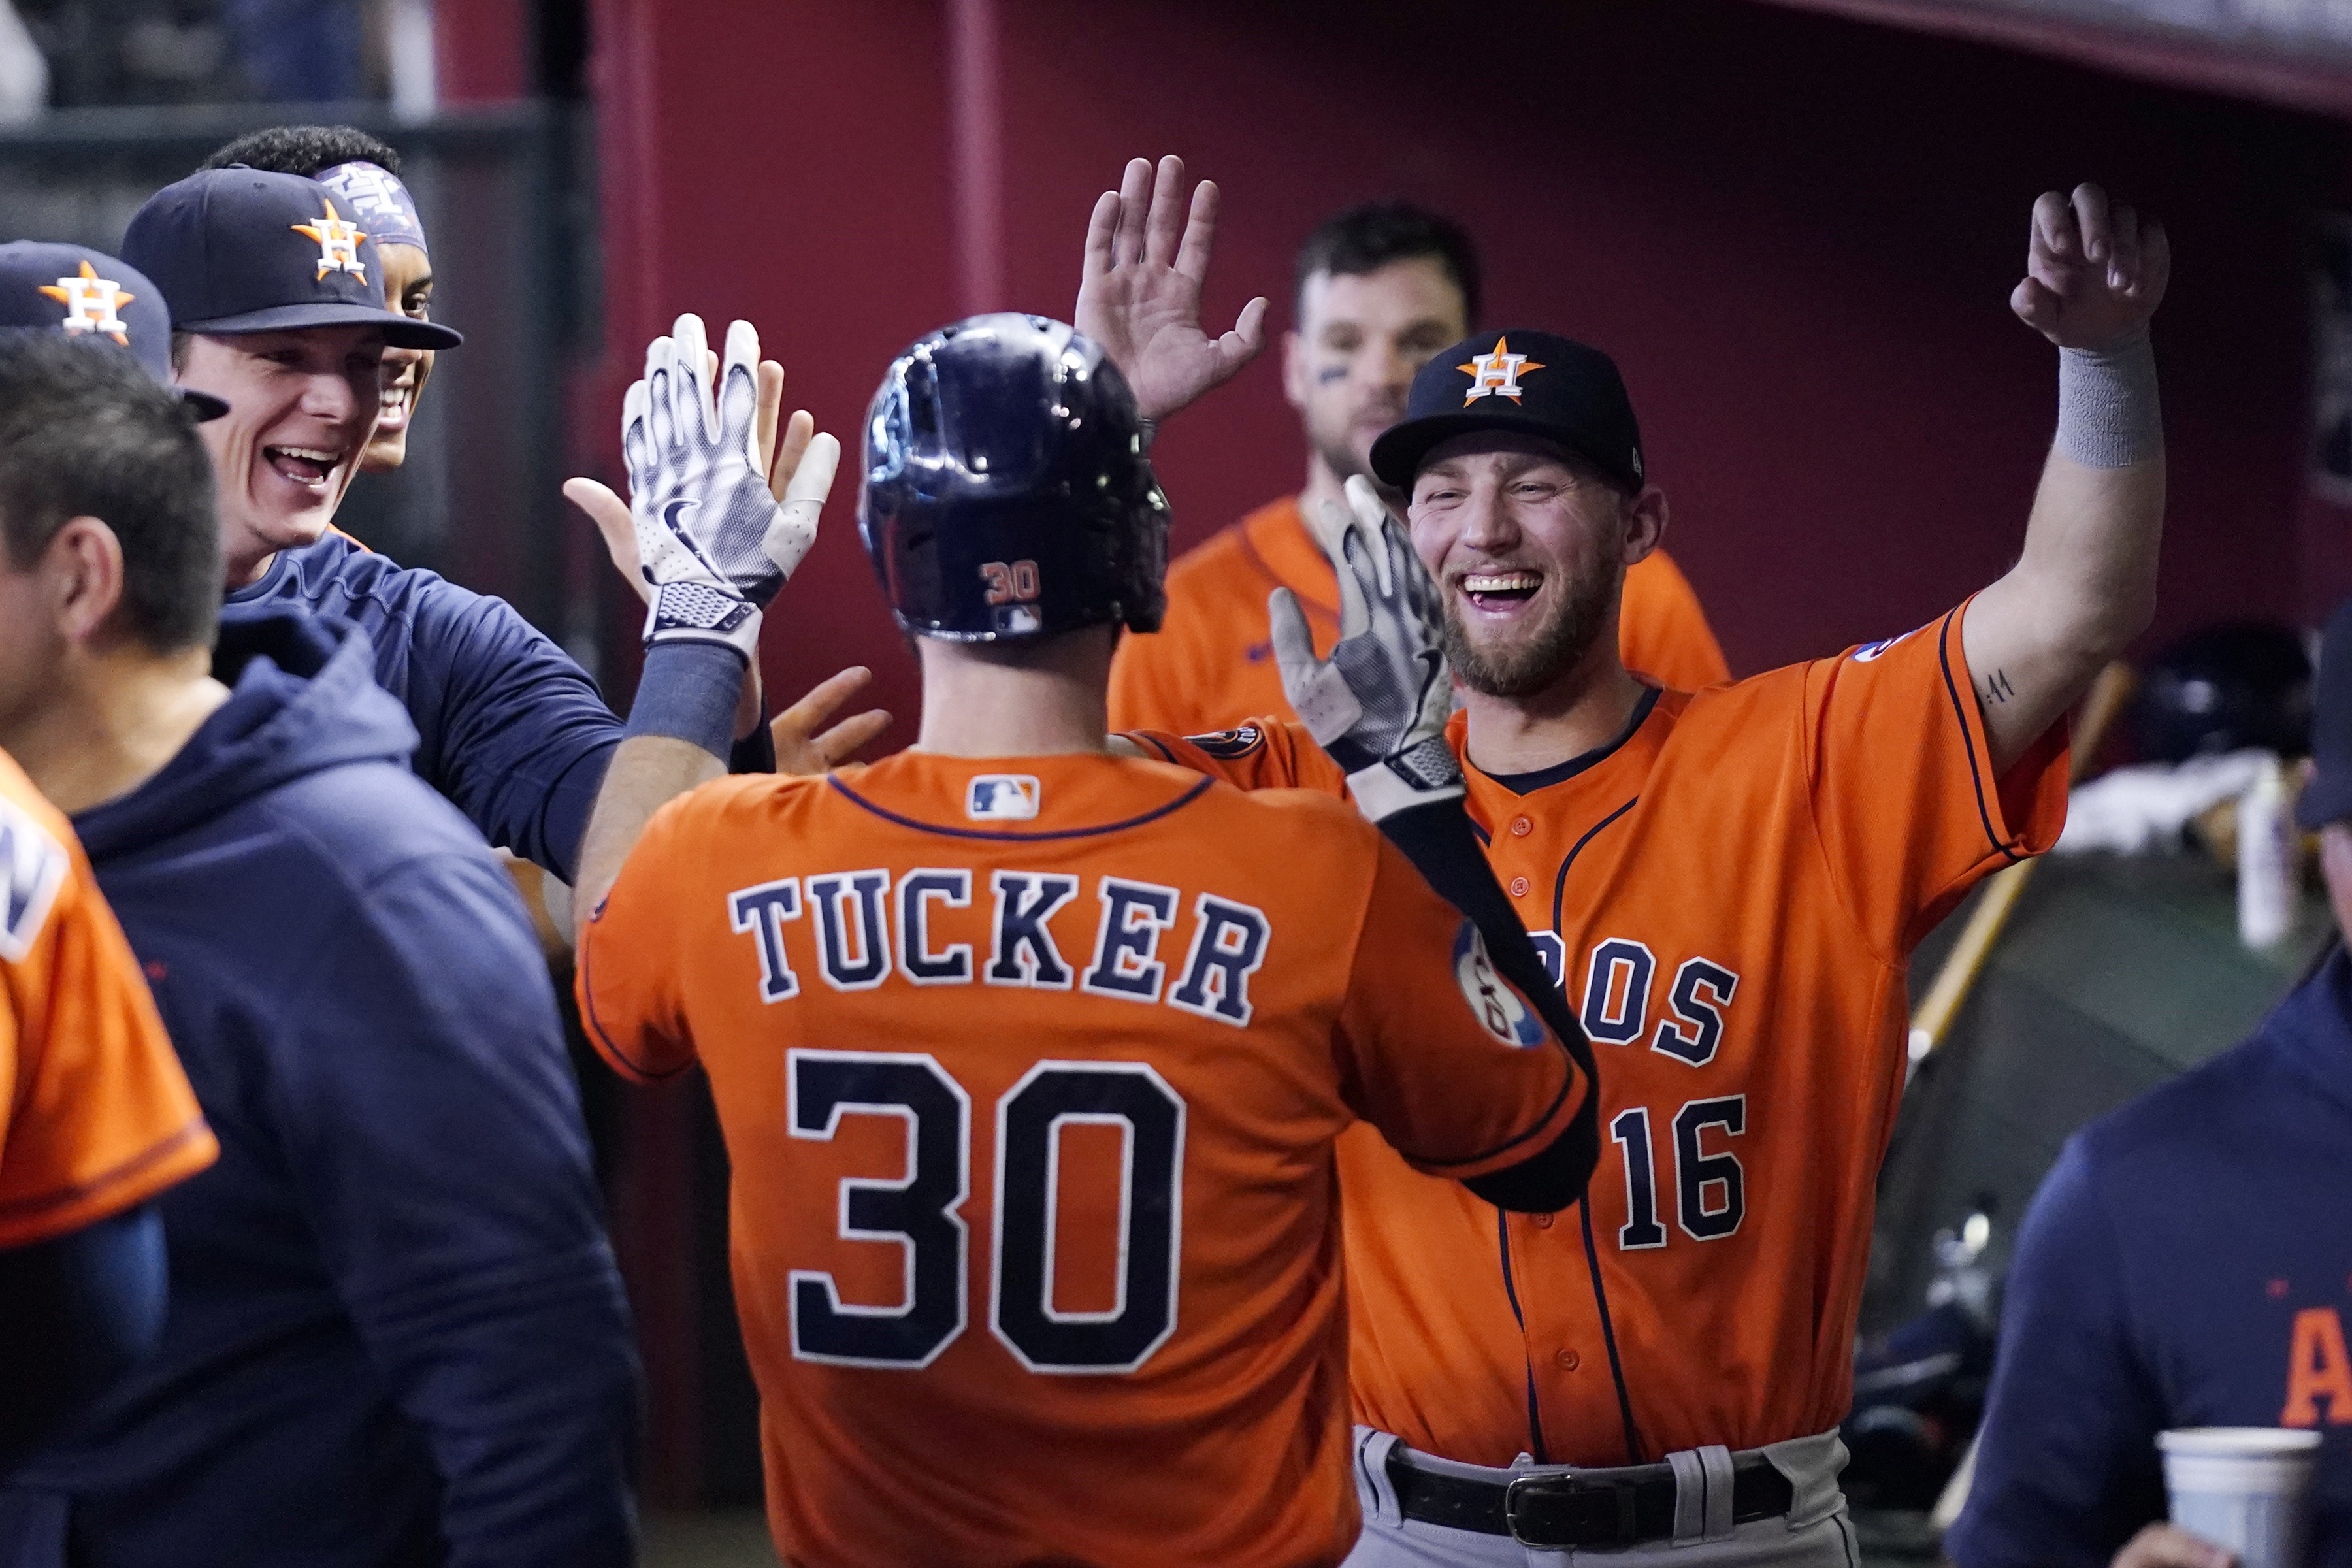 Tampa's Kyle Tucker 'has it all' for playoff-bound Astros